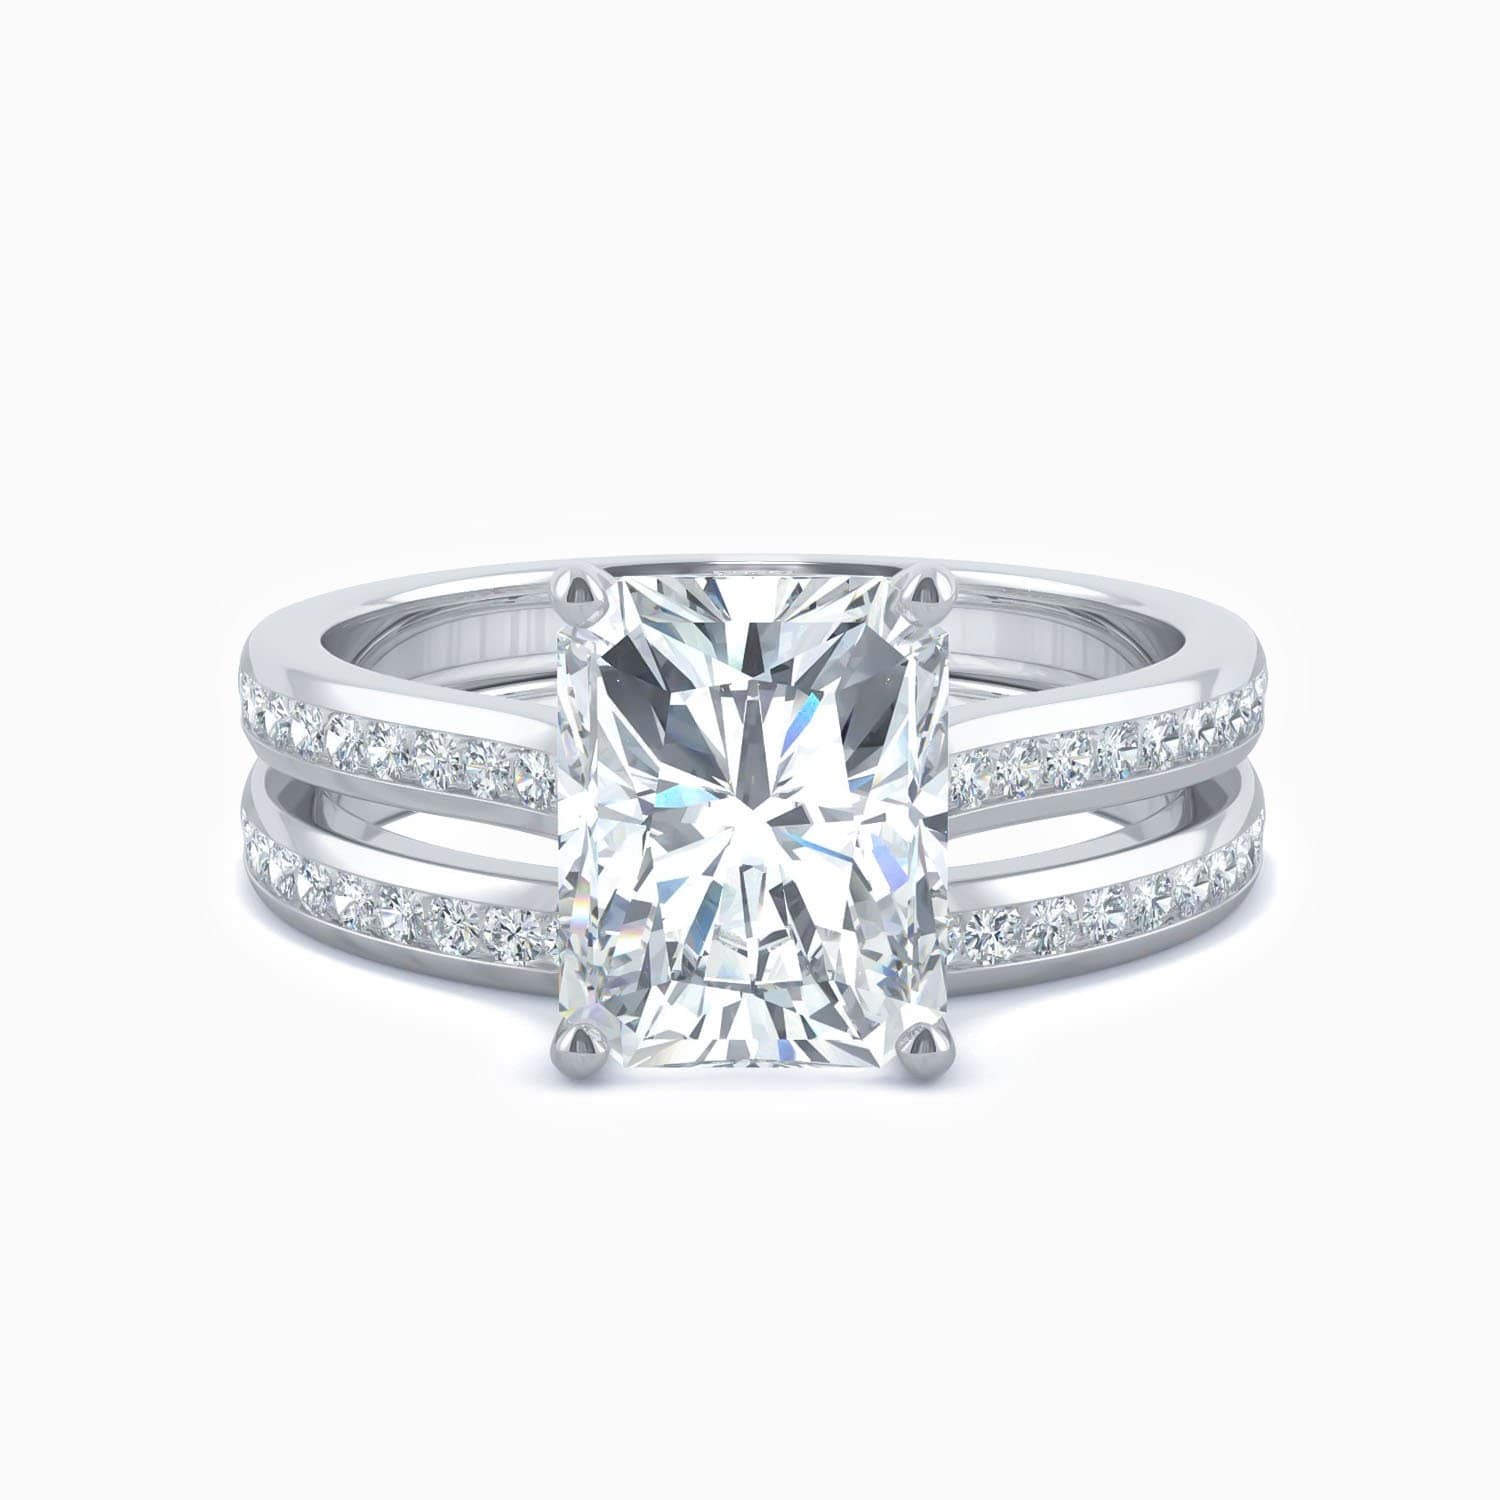 Promise Engagment Wedding Moissanite Bridal Sets Radiant Cut Solitaire Rings With Side Accents Sterling Silver White Gold Plating 3 Carats